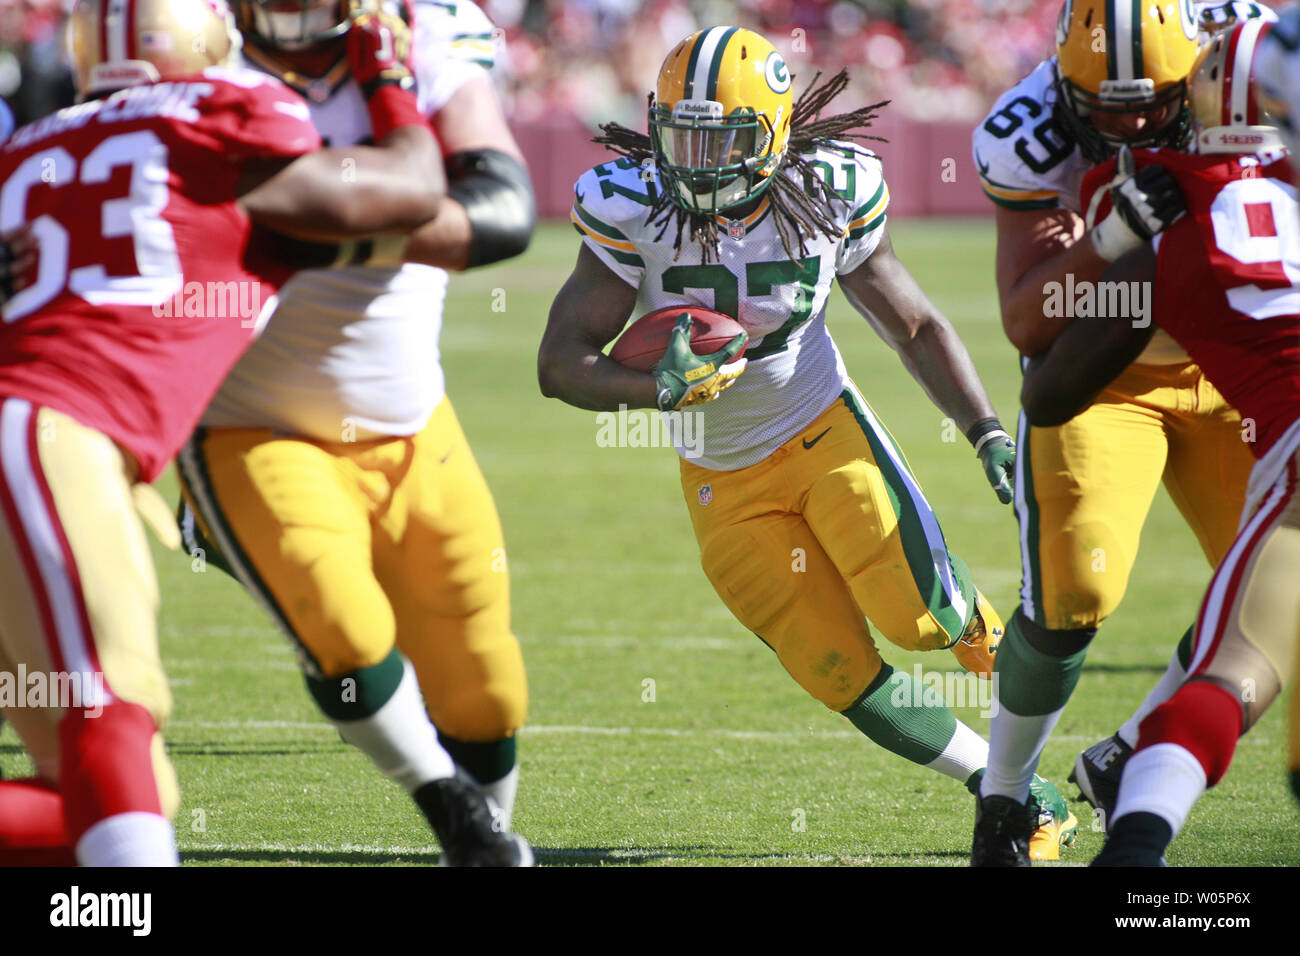 Green Bay Packers RB Eddie Lacy (27)  runs for six yards to the San Francisco 49ers two yard line in the fourth quarter at Candlestick Park in San Francisco on September 8, 2013.The 49ers defeated the Packers 34-28.    UPI/Bruce Gordon Stock Photo